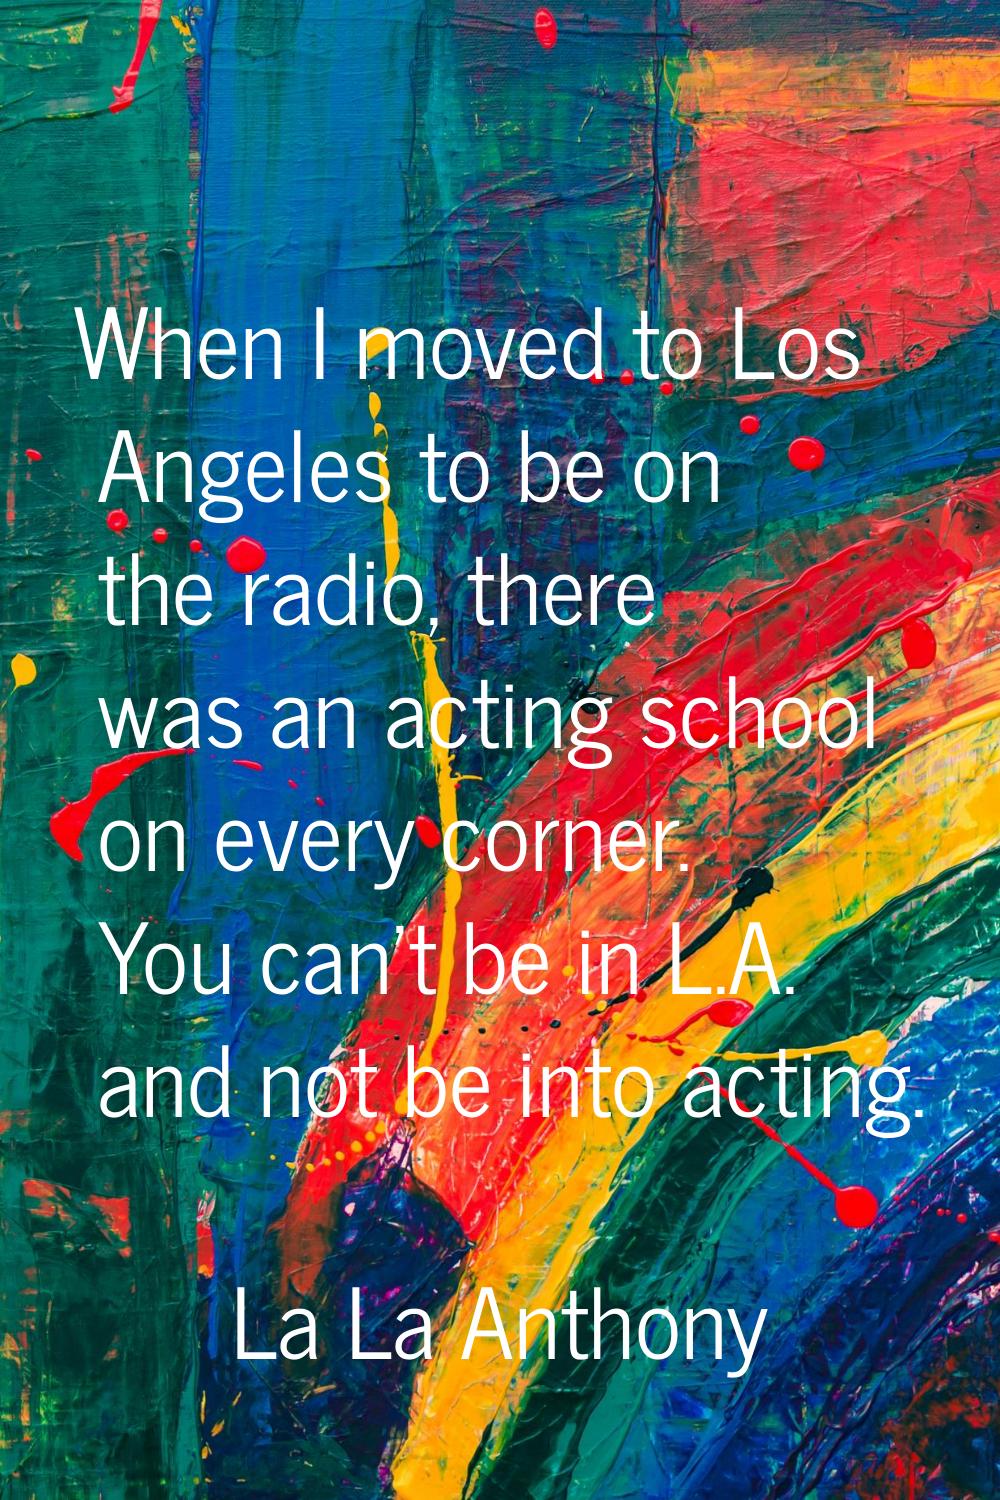 When I moved to Los Angeles to be on the radio, there was an acting school on every corner. You can